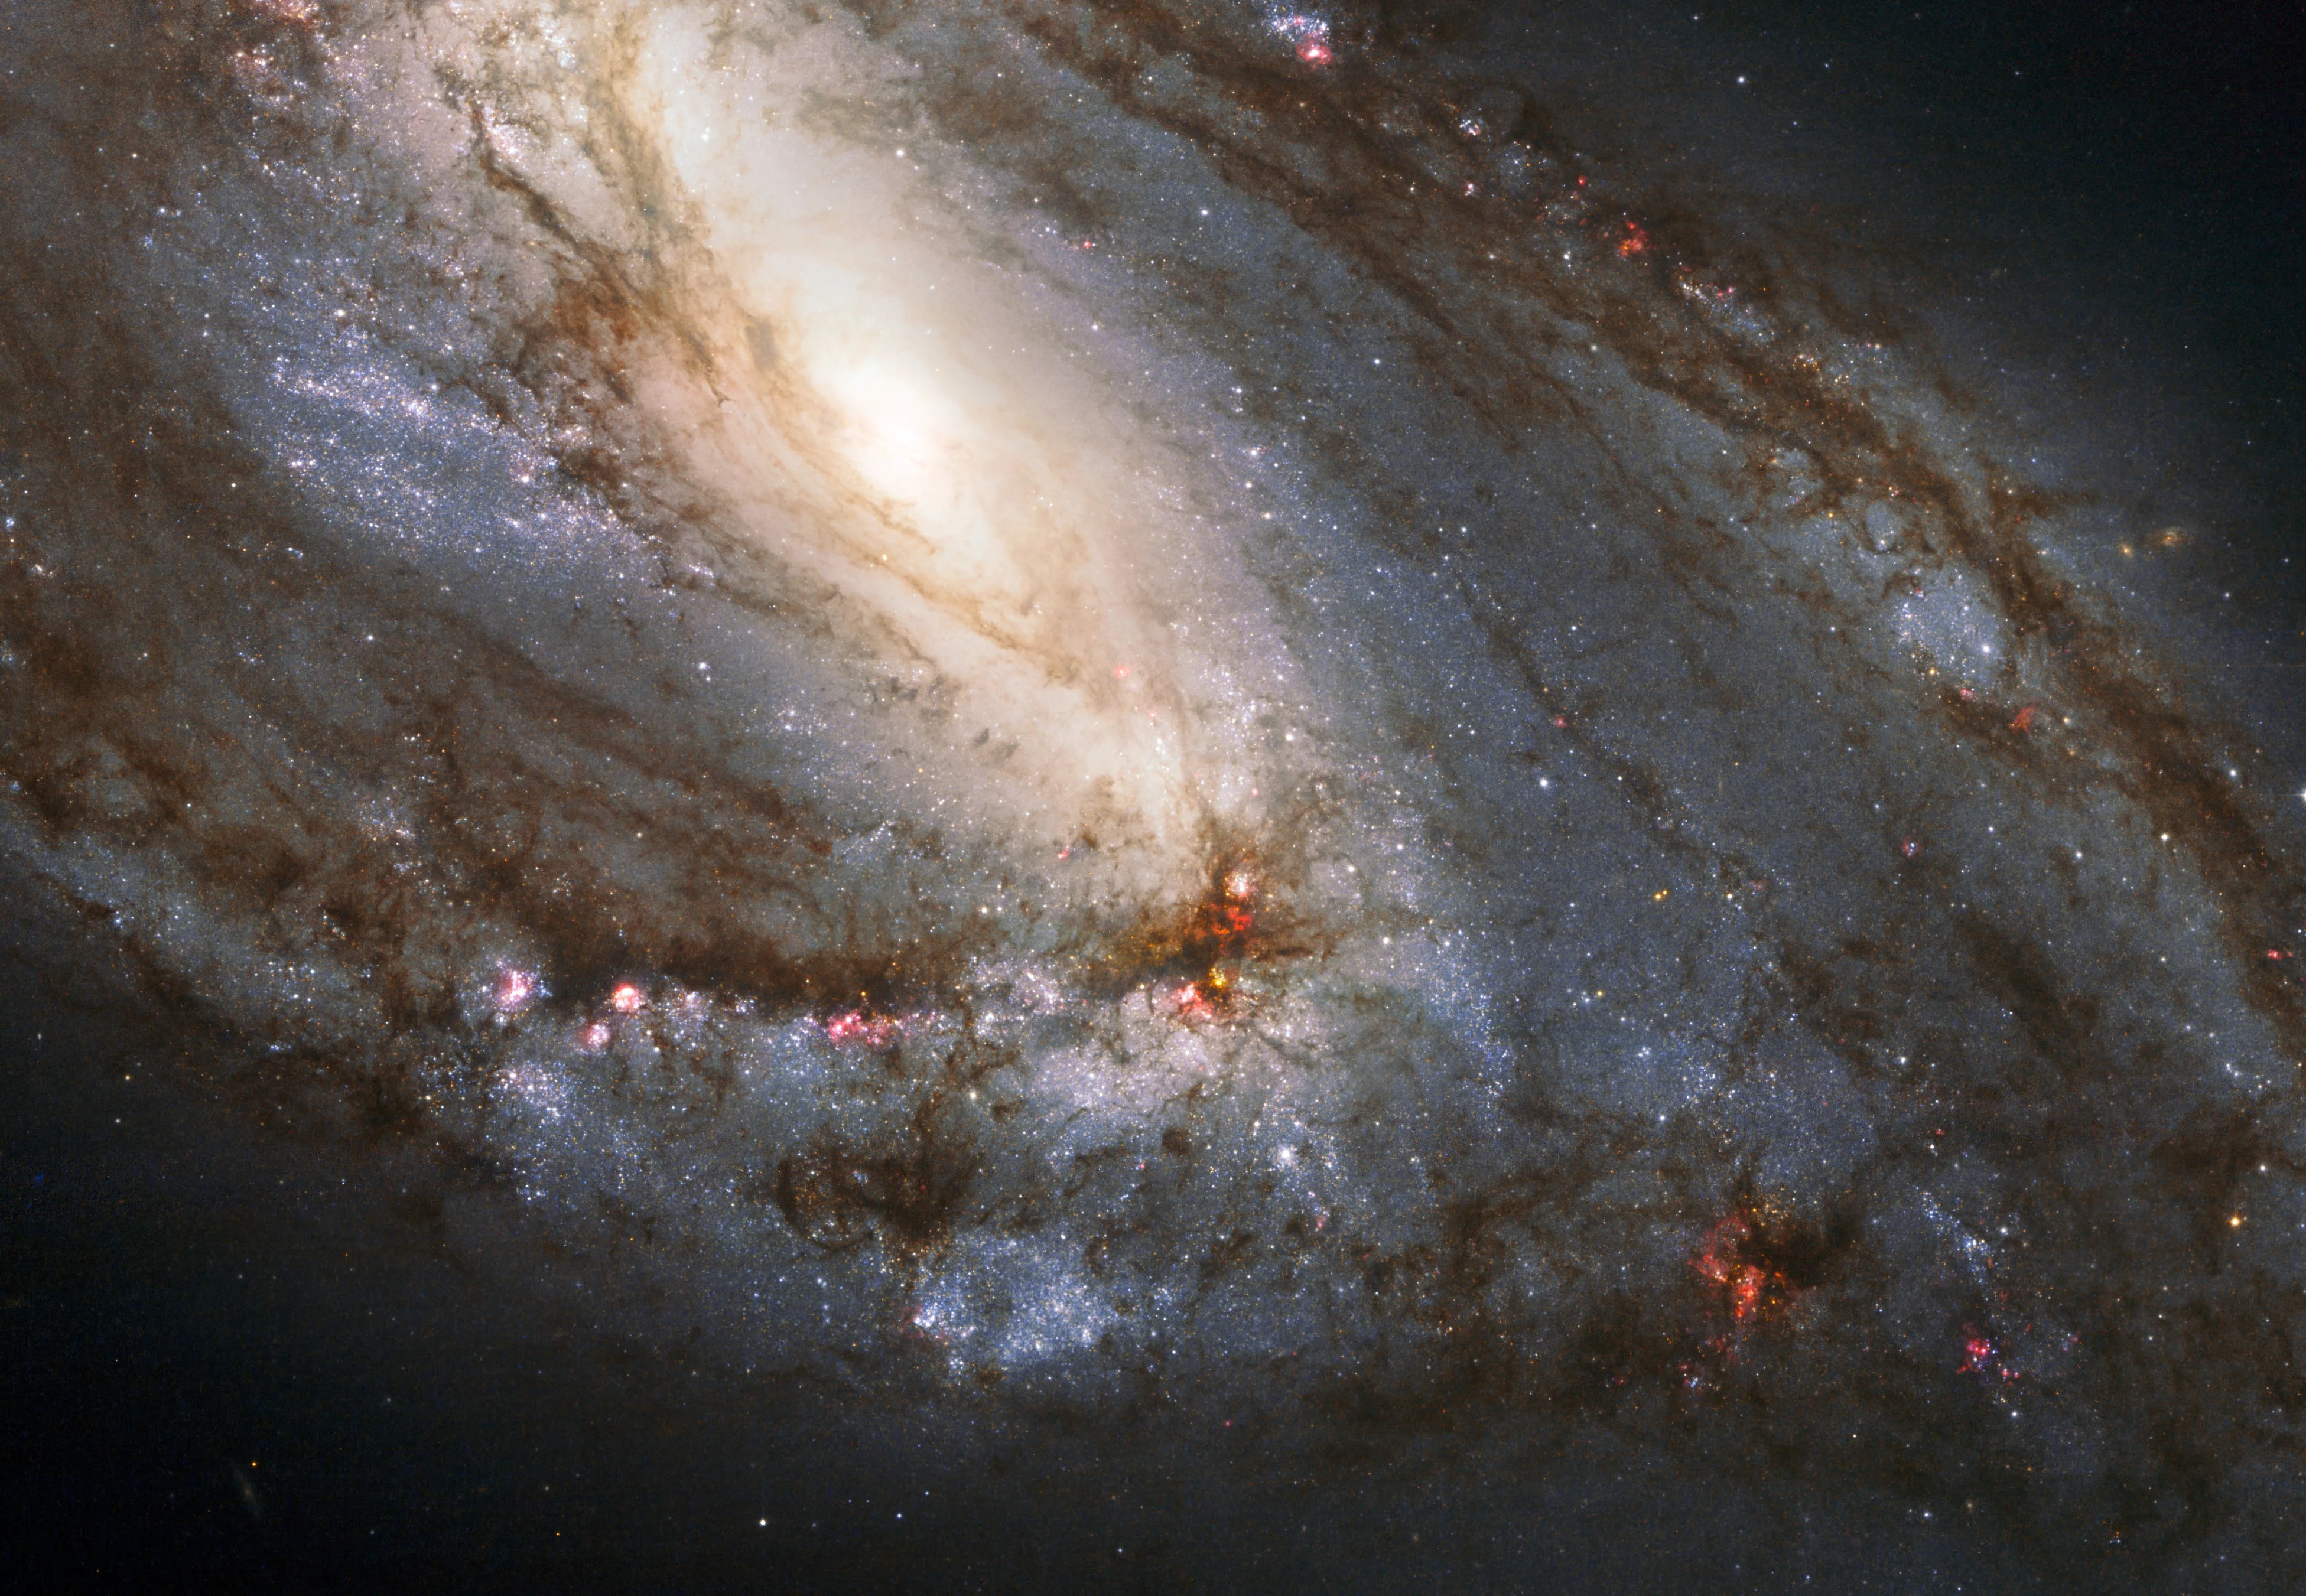 A spiral galaxy is viewed sideways, with the glowing core closer to the upper left of the image. It is surrounded by spiral arms laced through with dark dust and bright regions of star formation.